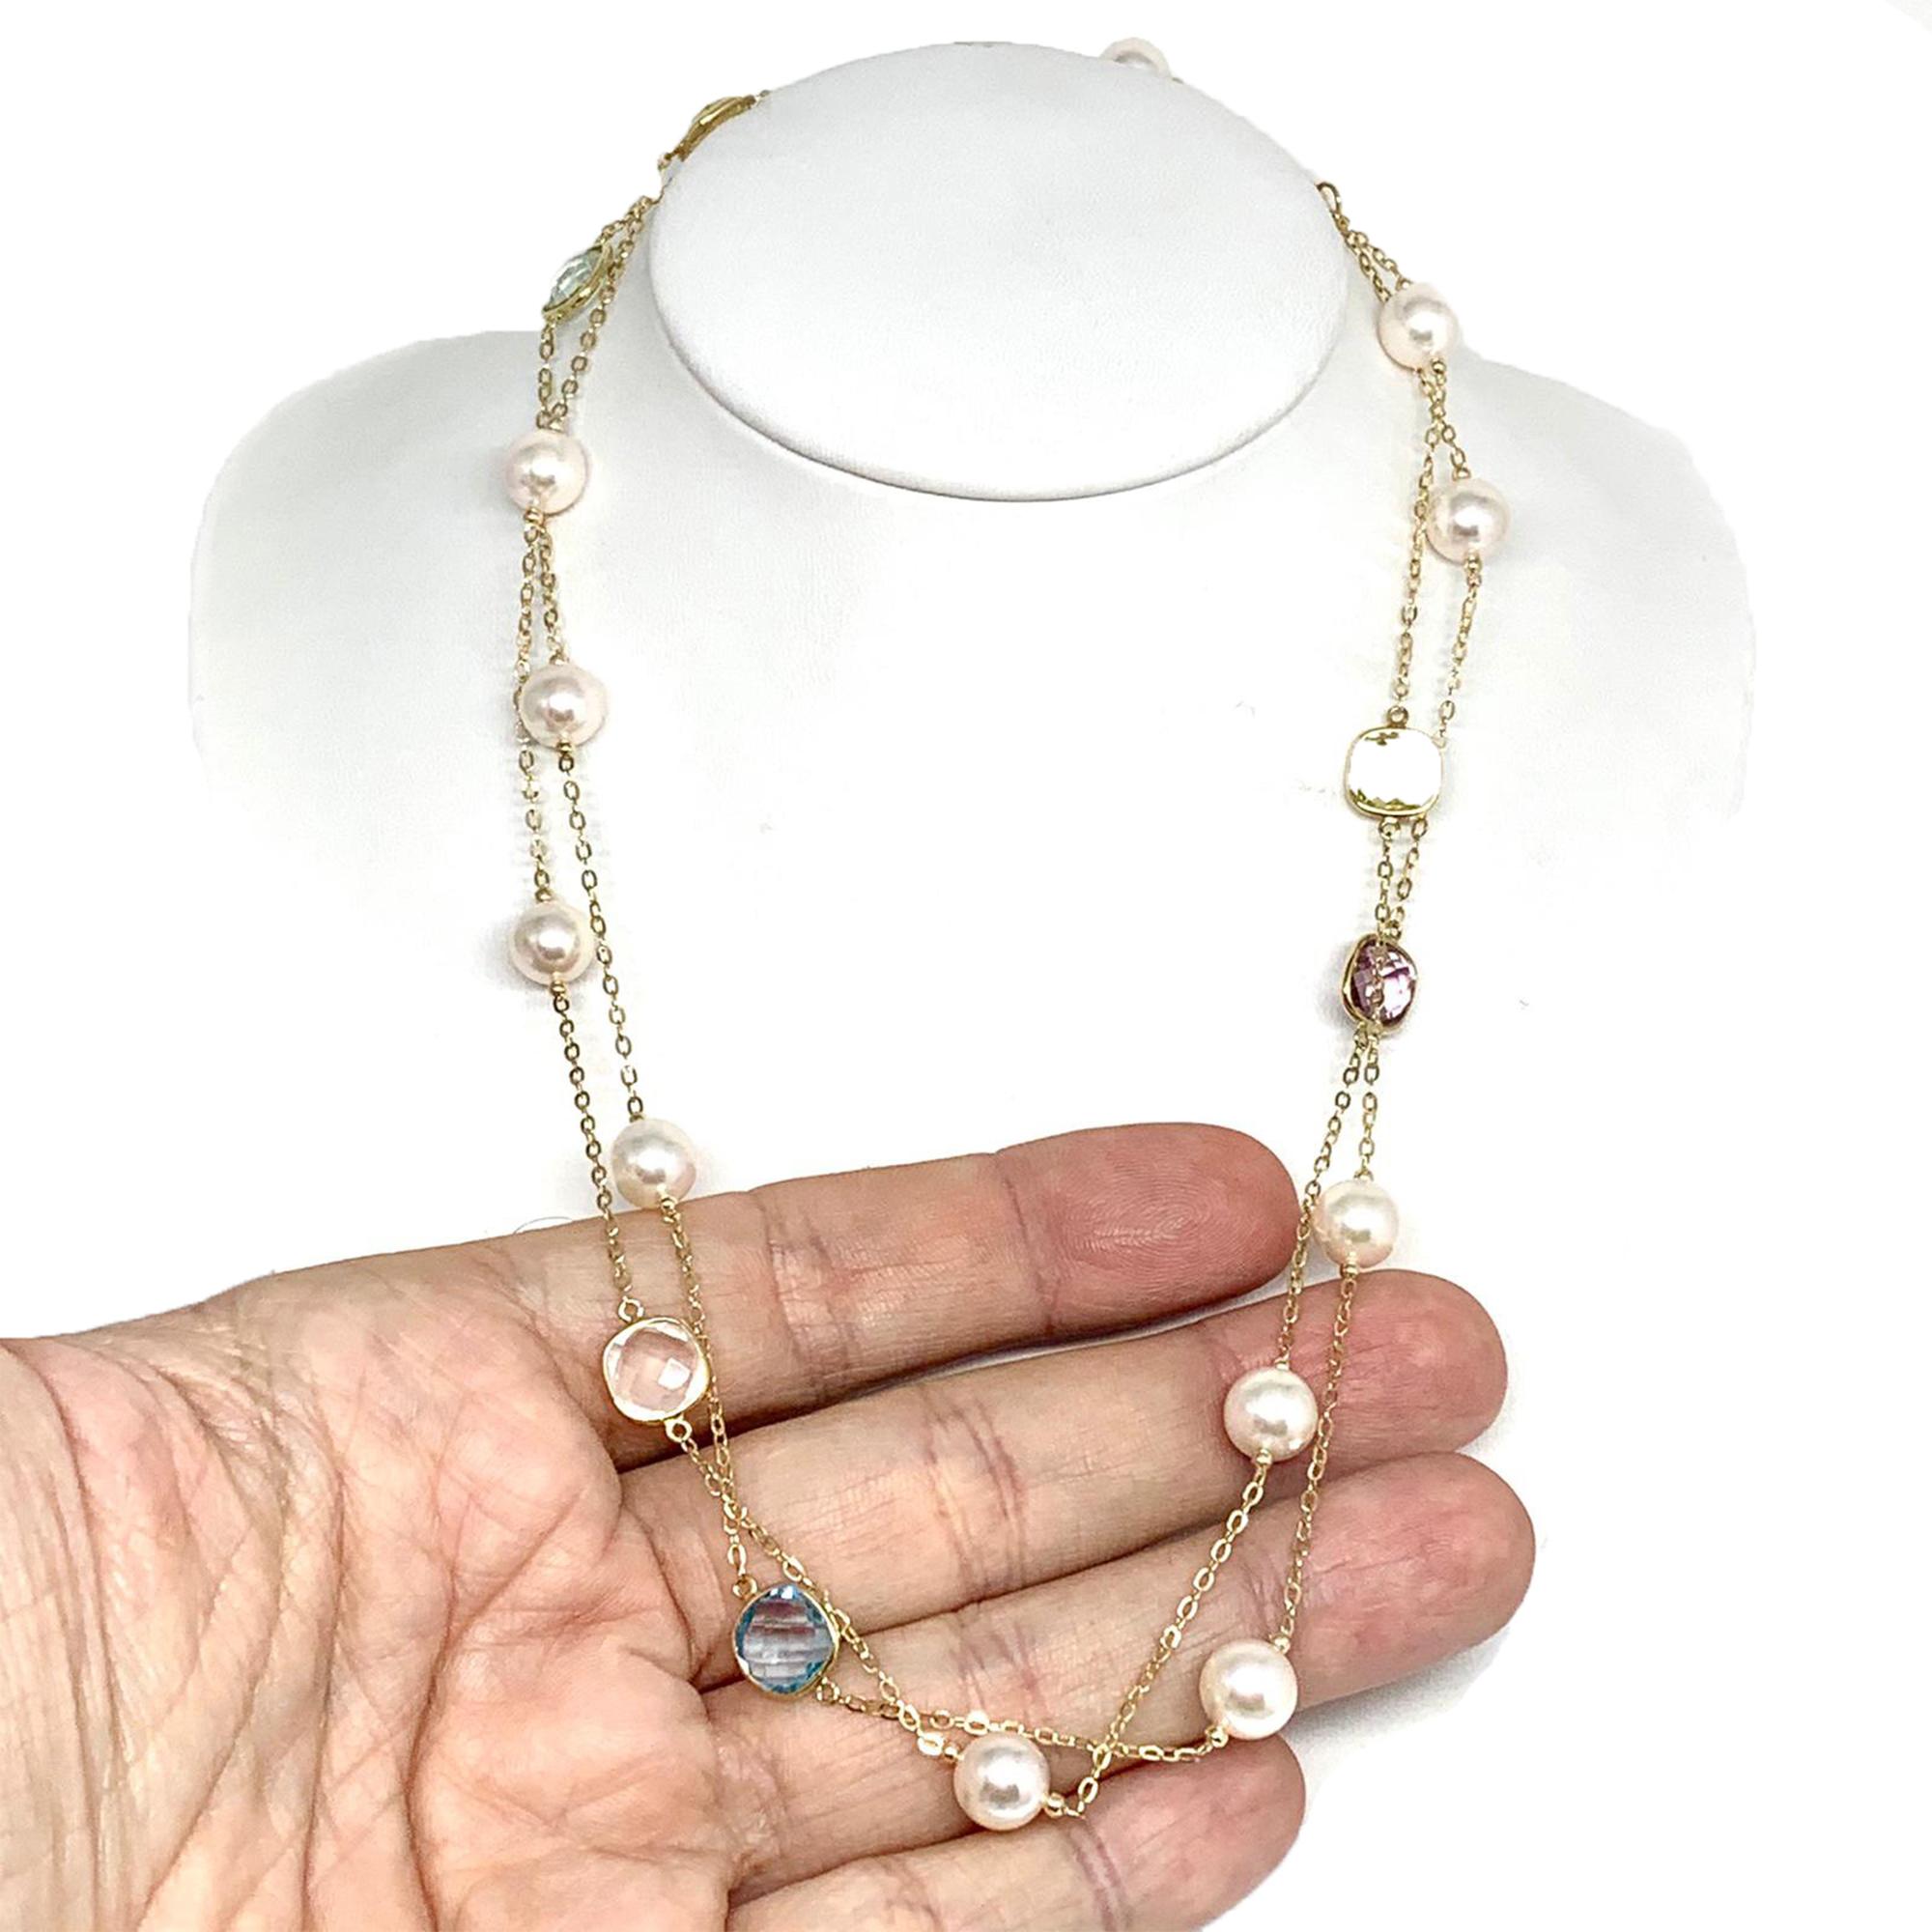 Round Cut Akoya Pearl Quartz Necklace 14k Gold Station Certified